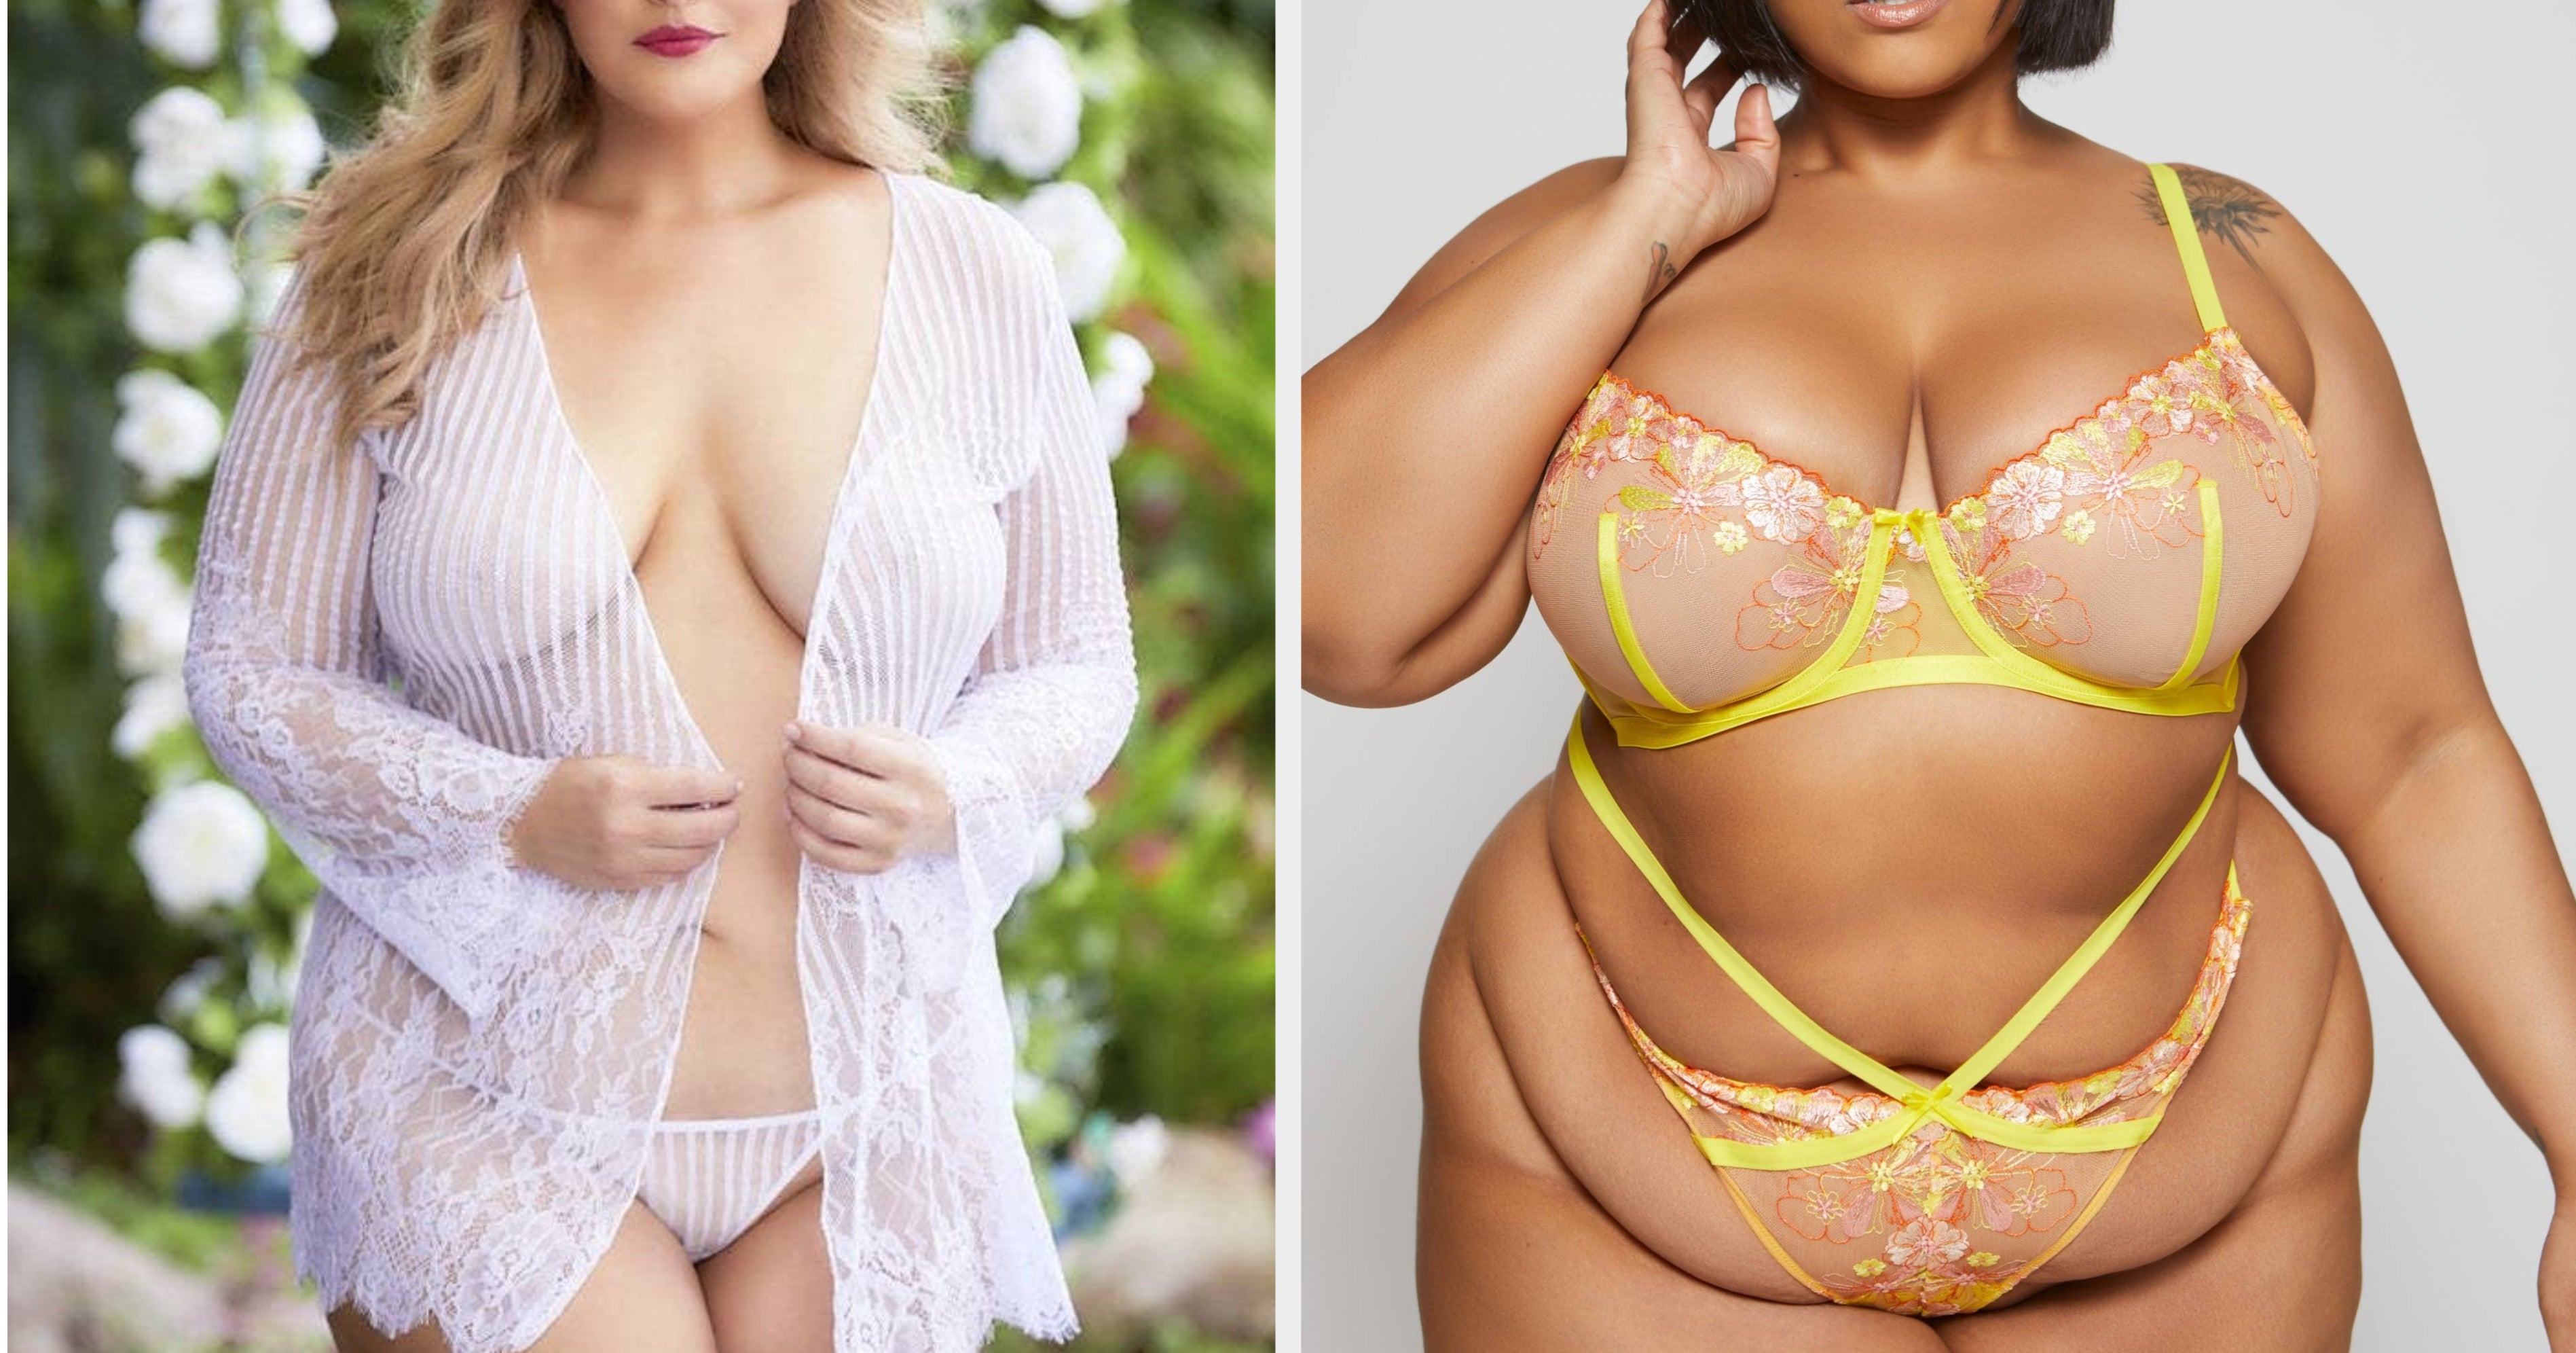 troon kop Gedachte 34 Best Plus Size Lingerie Pieces To Spice Things Up